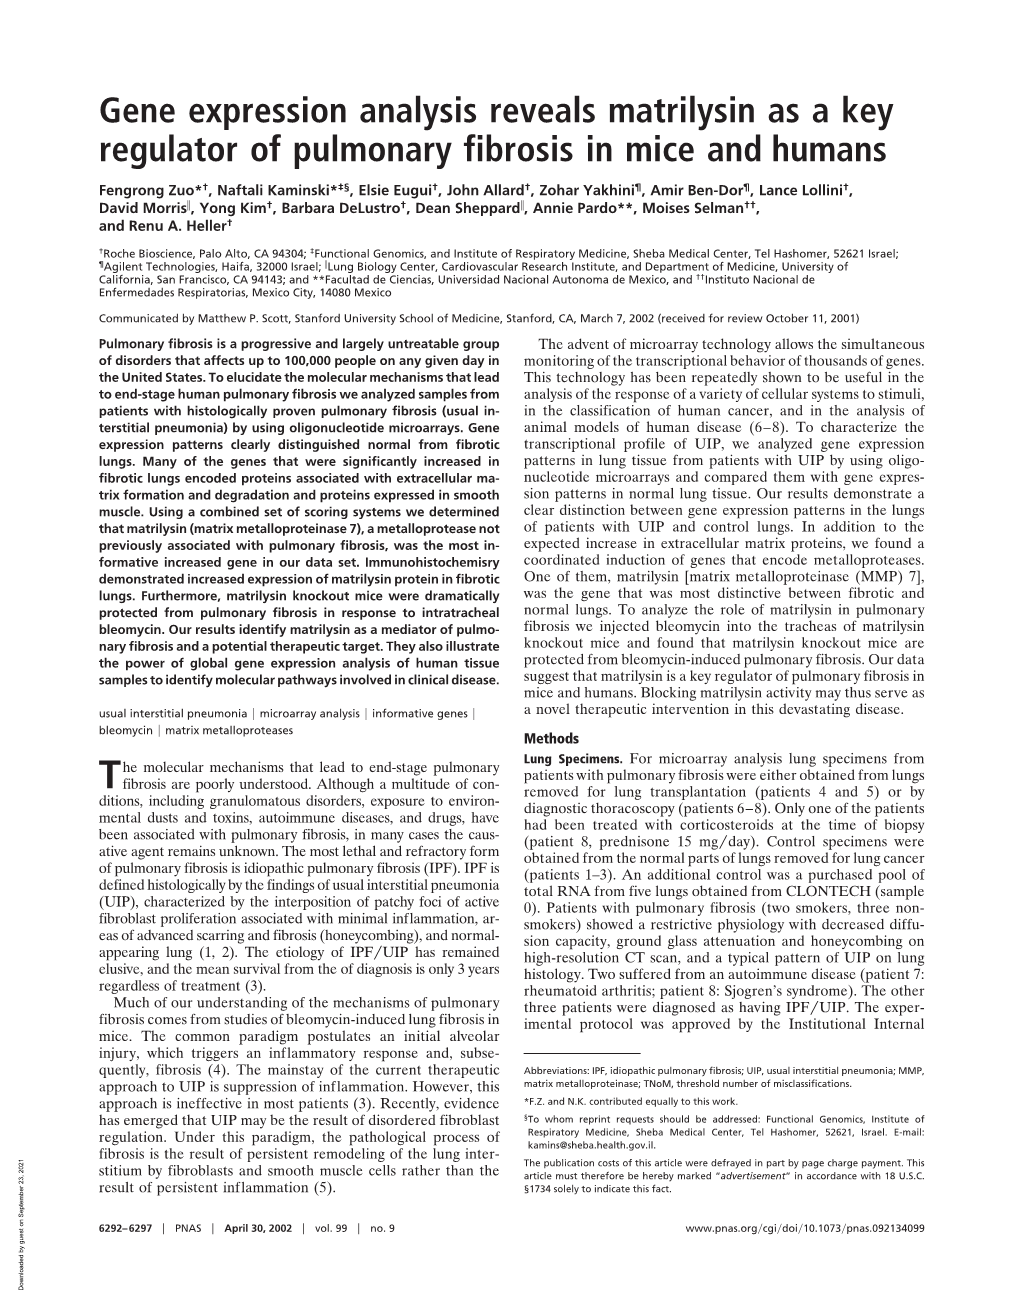 Gene Expression Analysis Reveals Matrilysin As a Key Regulator of Pulmonary Fibrosis in Mice and Humans